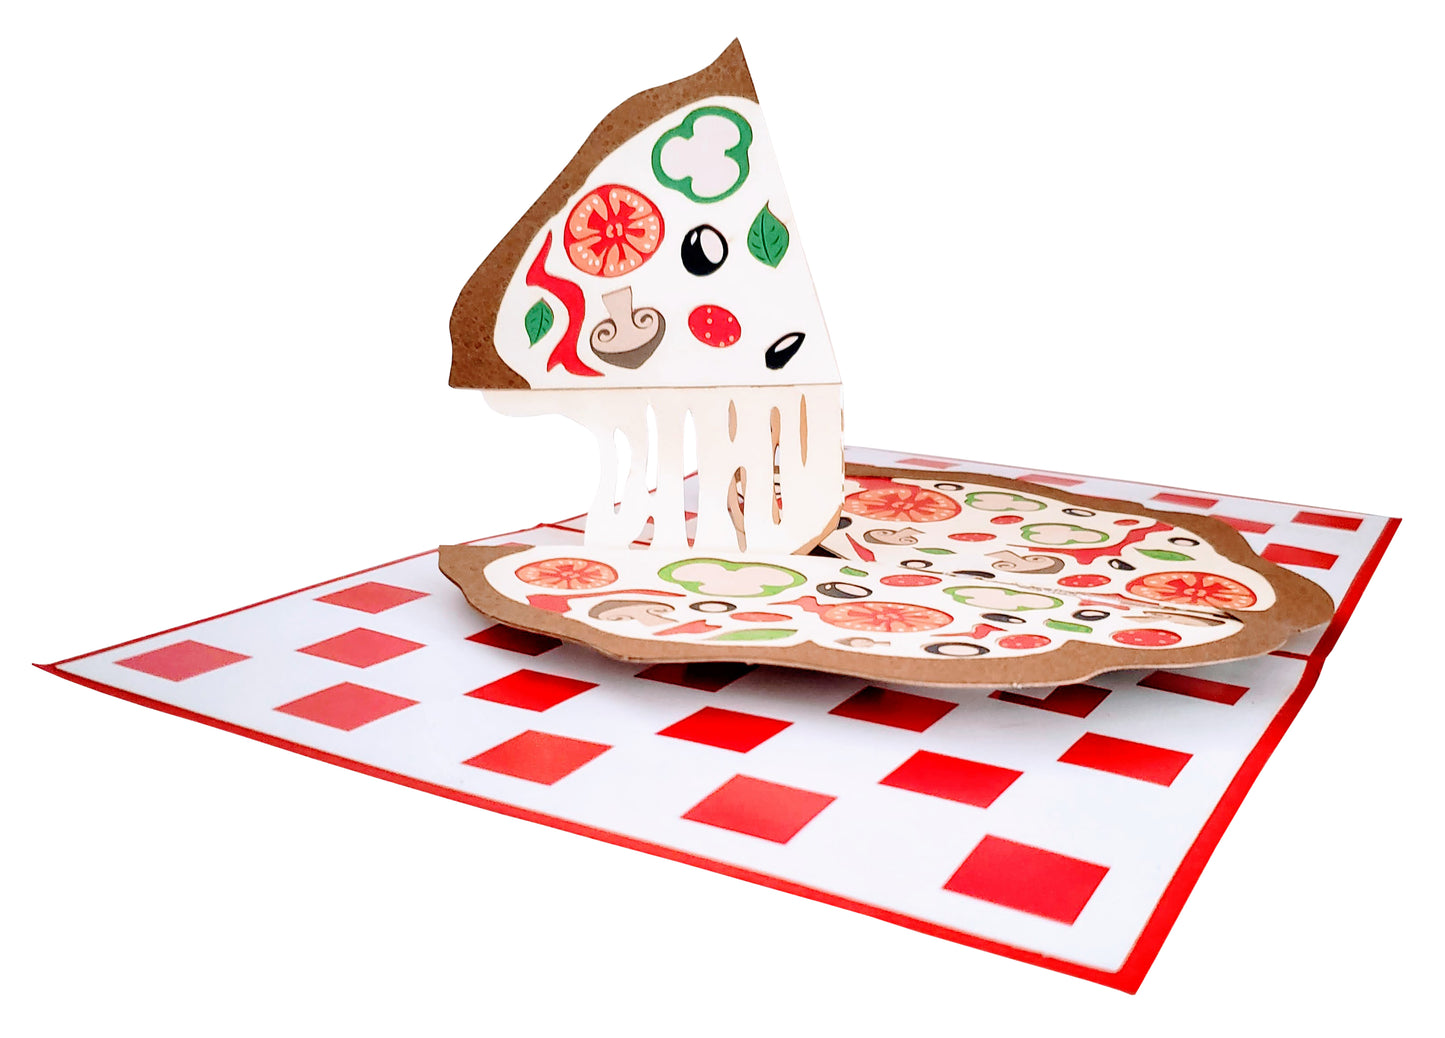 Gourmet Pizza 3D Pop Up Greeting Card - All Occasion - Birthday - Celebration - Centerpiece - Cute - iGifts And Cards